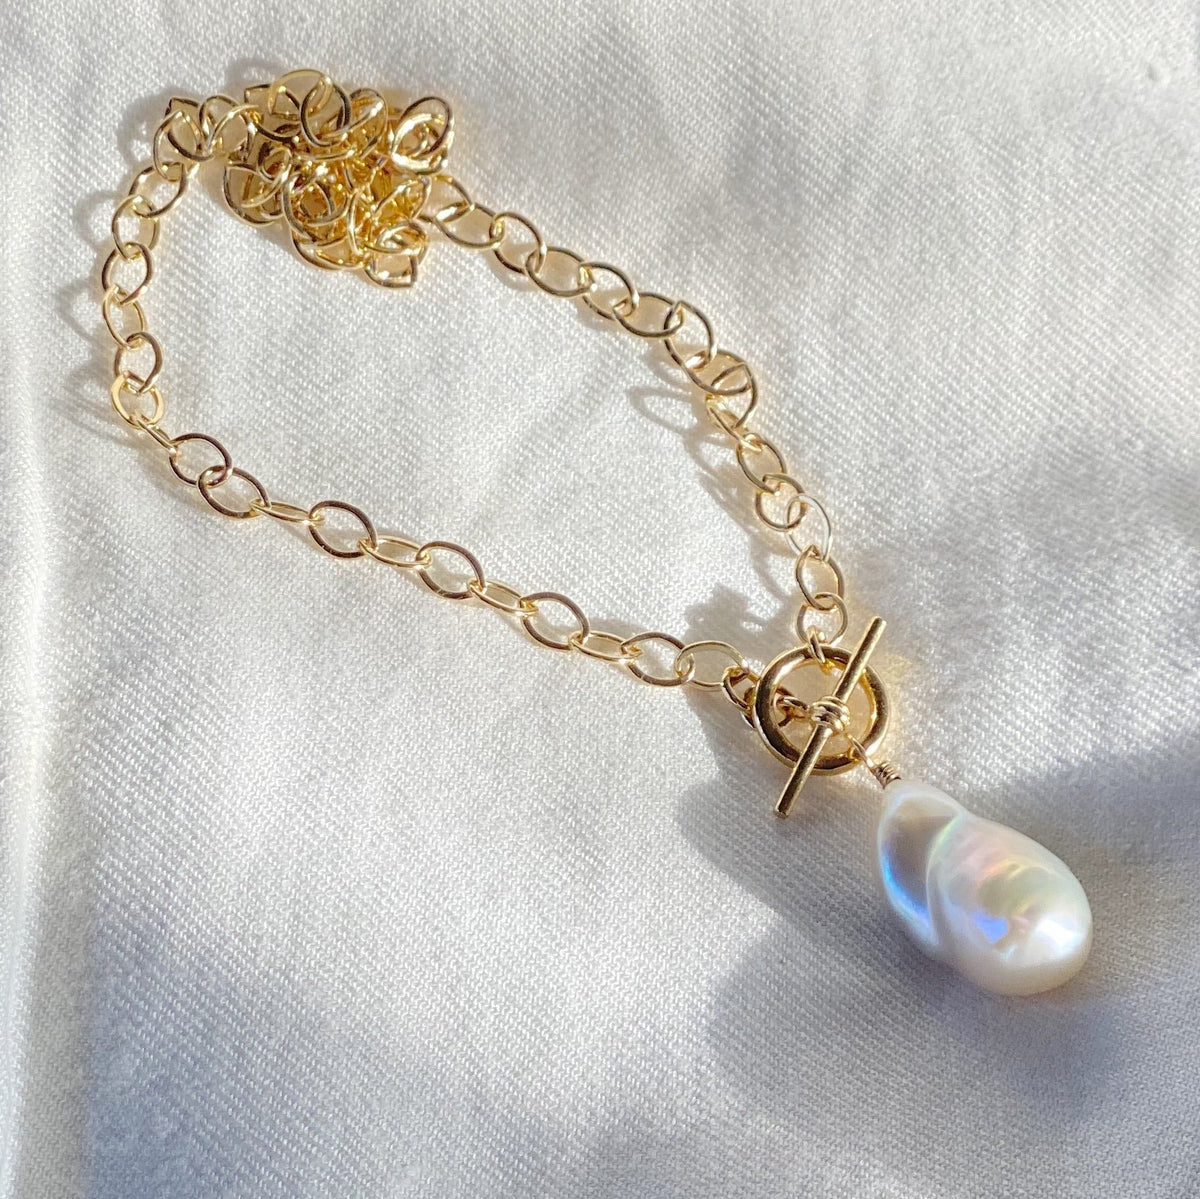 Siren Ripples Necklace - Freshwater Baroque Pearl Necklace